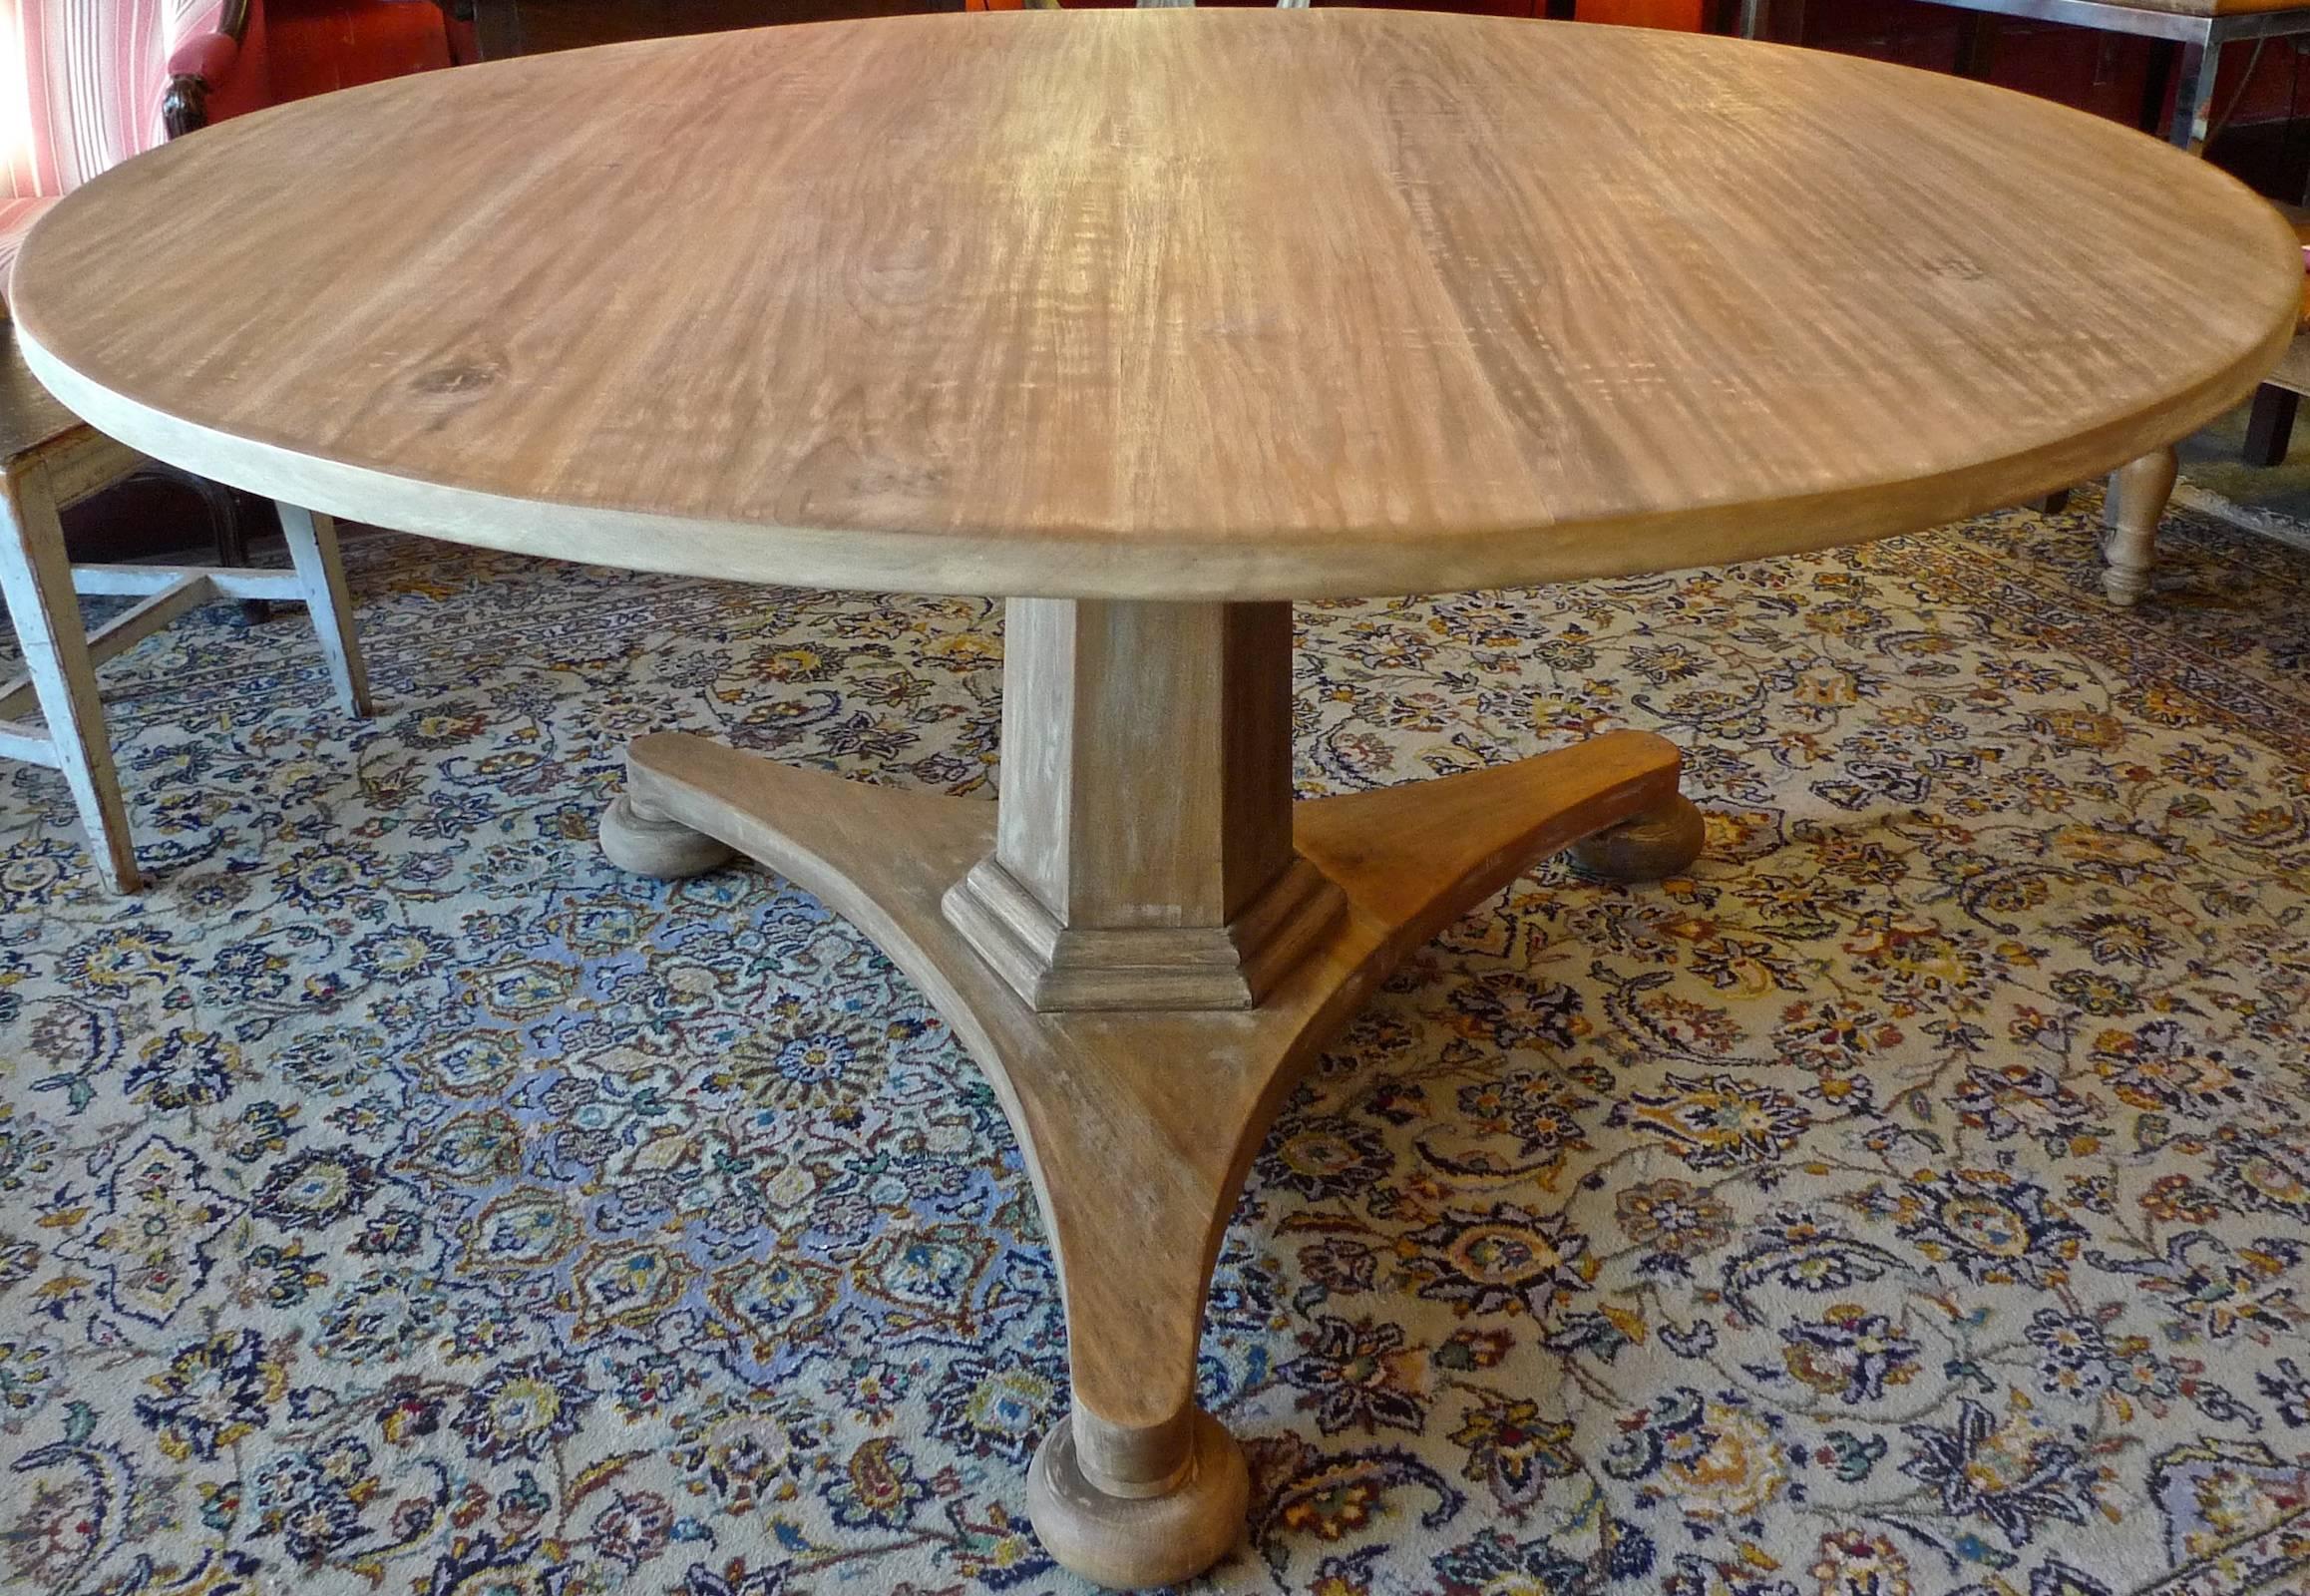 Swedish style contemporary alder-wood round pedestal table. Made to customers specifications.